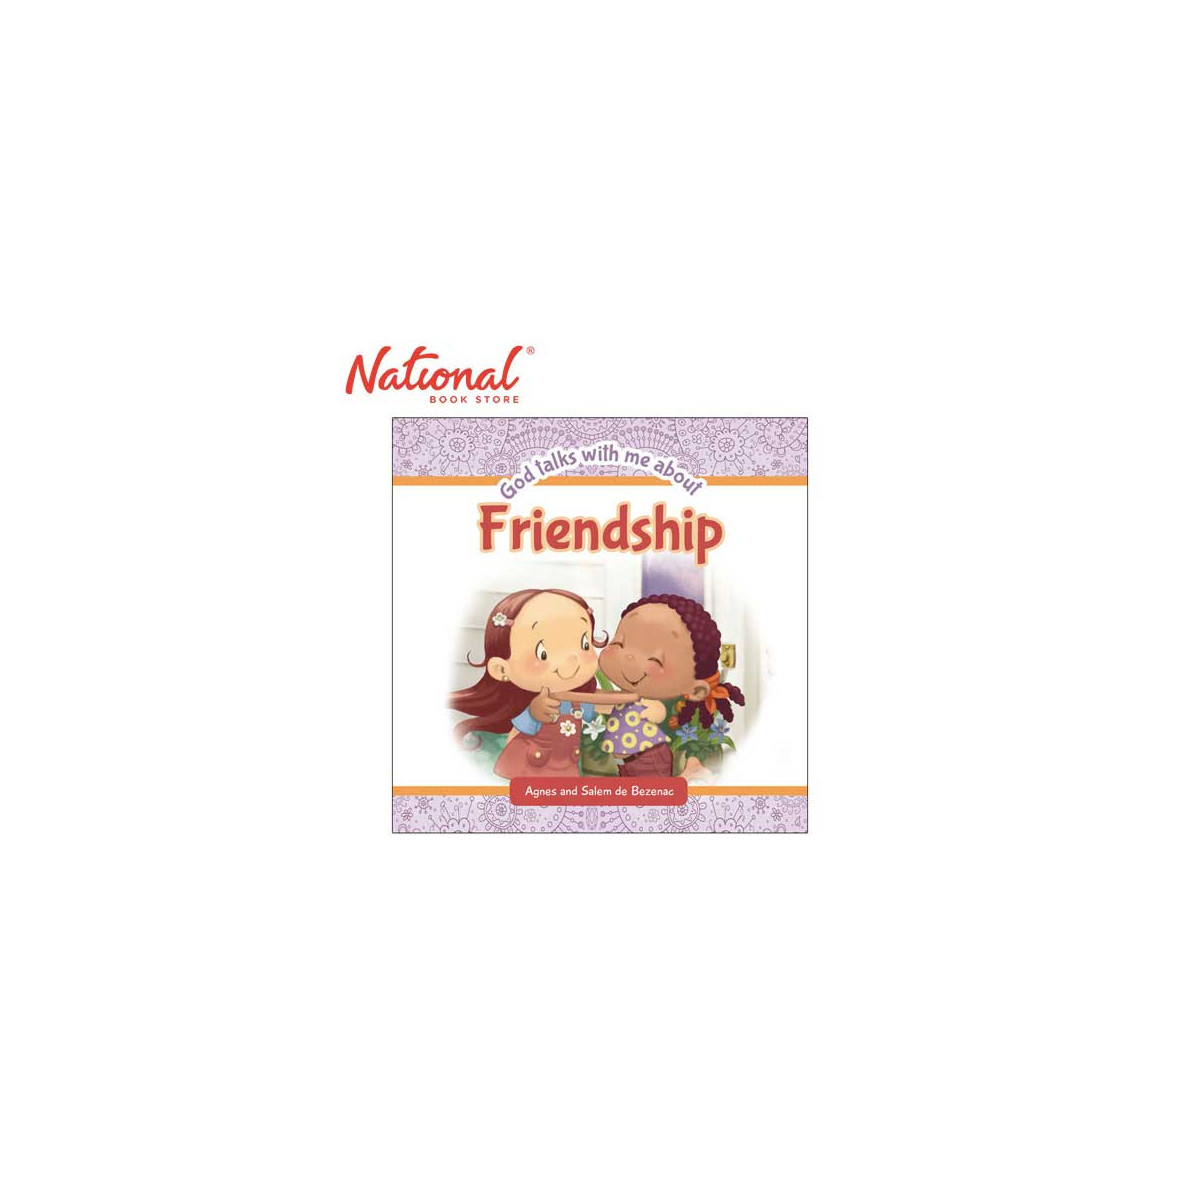 God Talks With Me About Friendship - Trade Paperback - Bible Study for Kids